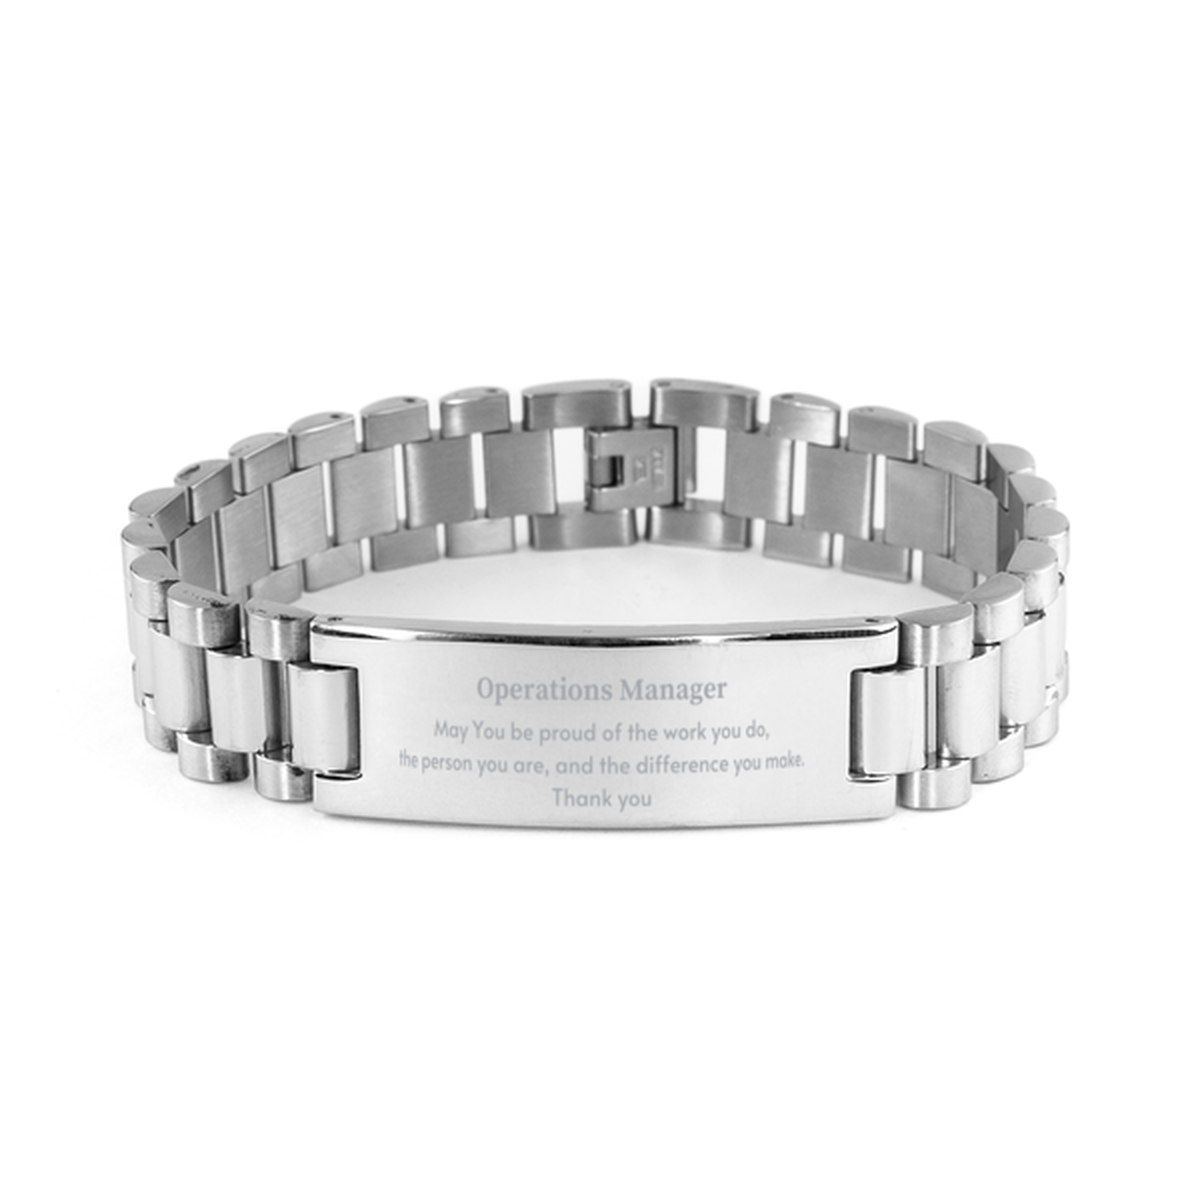 Heartwarming Ladder Stainless Steel Bracelet Retirement Coworkers Gifts for Operations Manager, Operations Manager May You be proud of the work you do, the person you are Gifts for Boss Men Women Friends